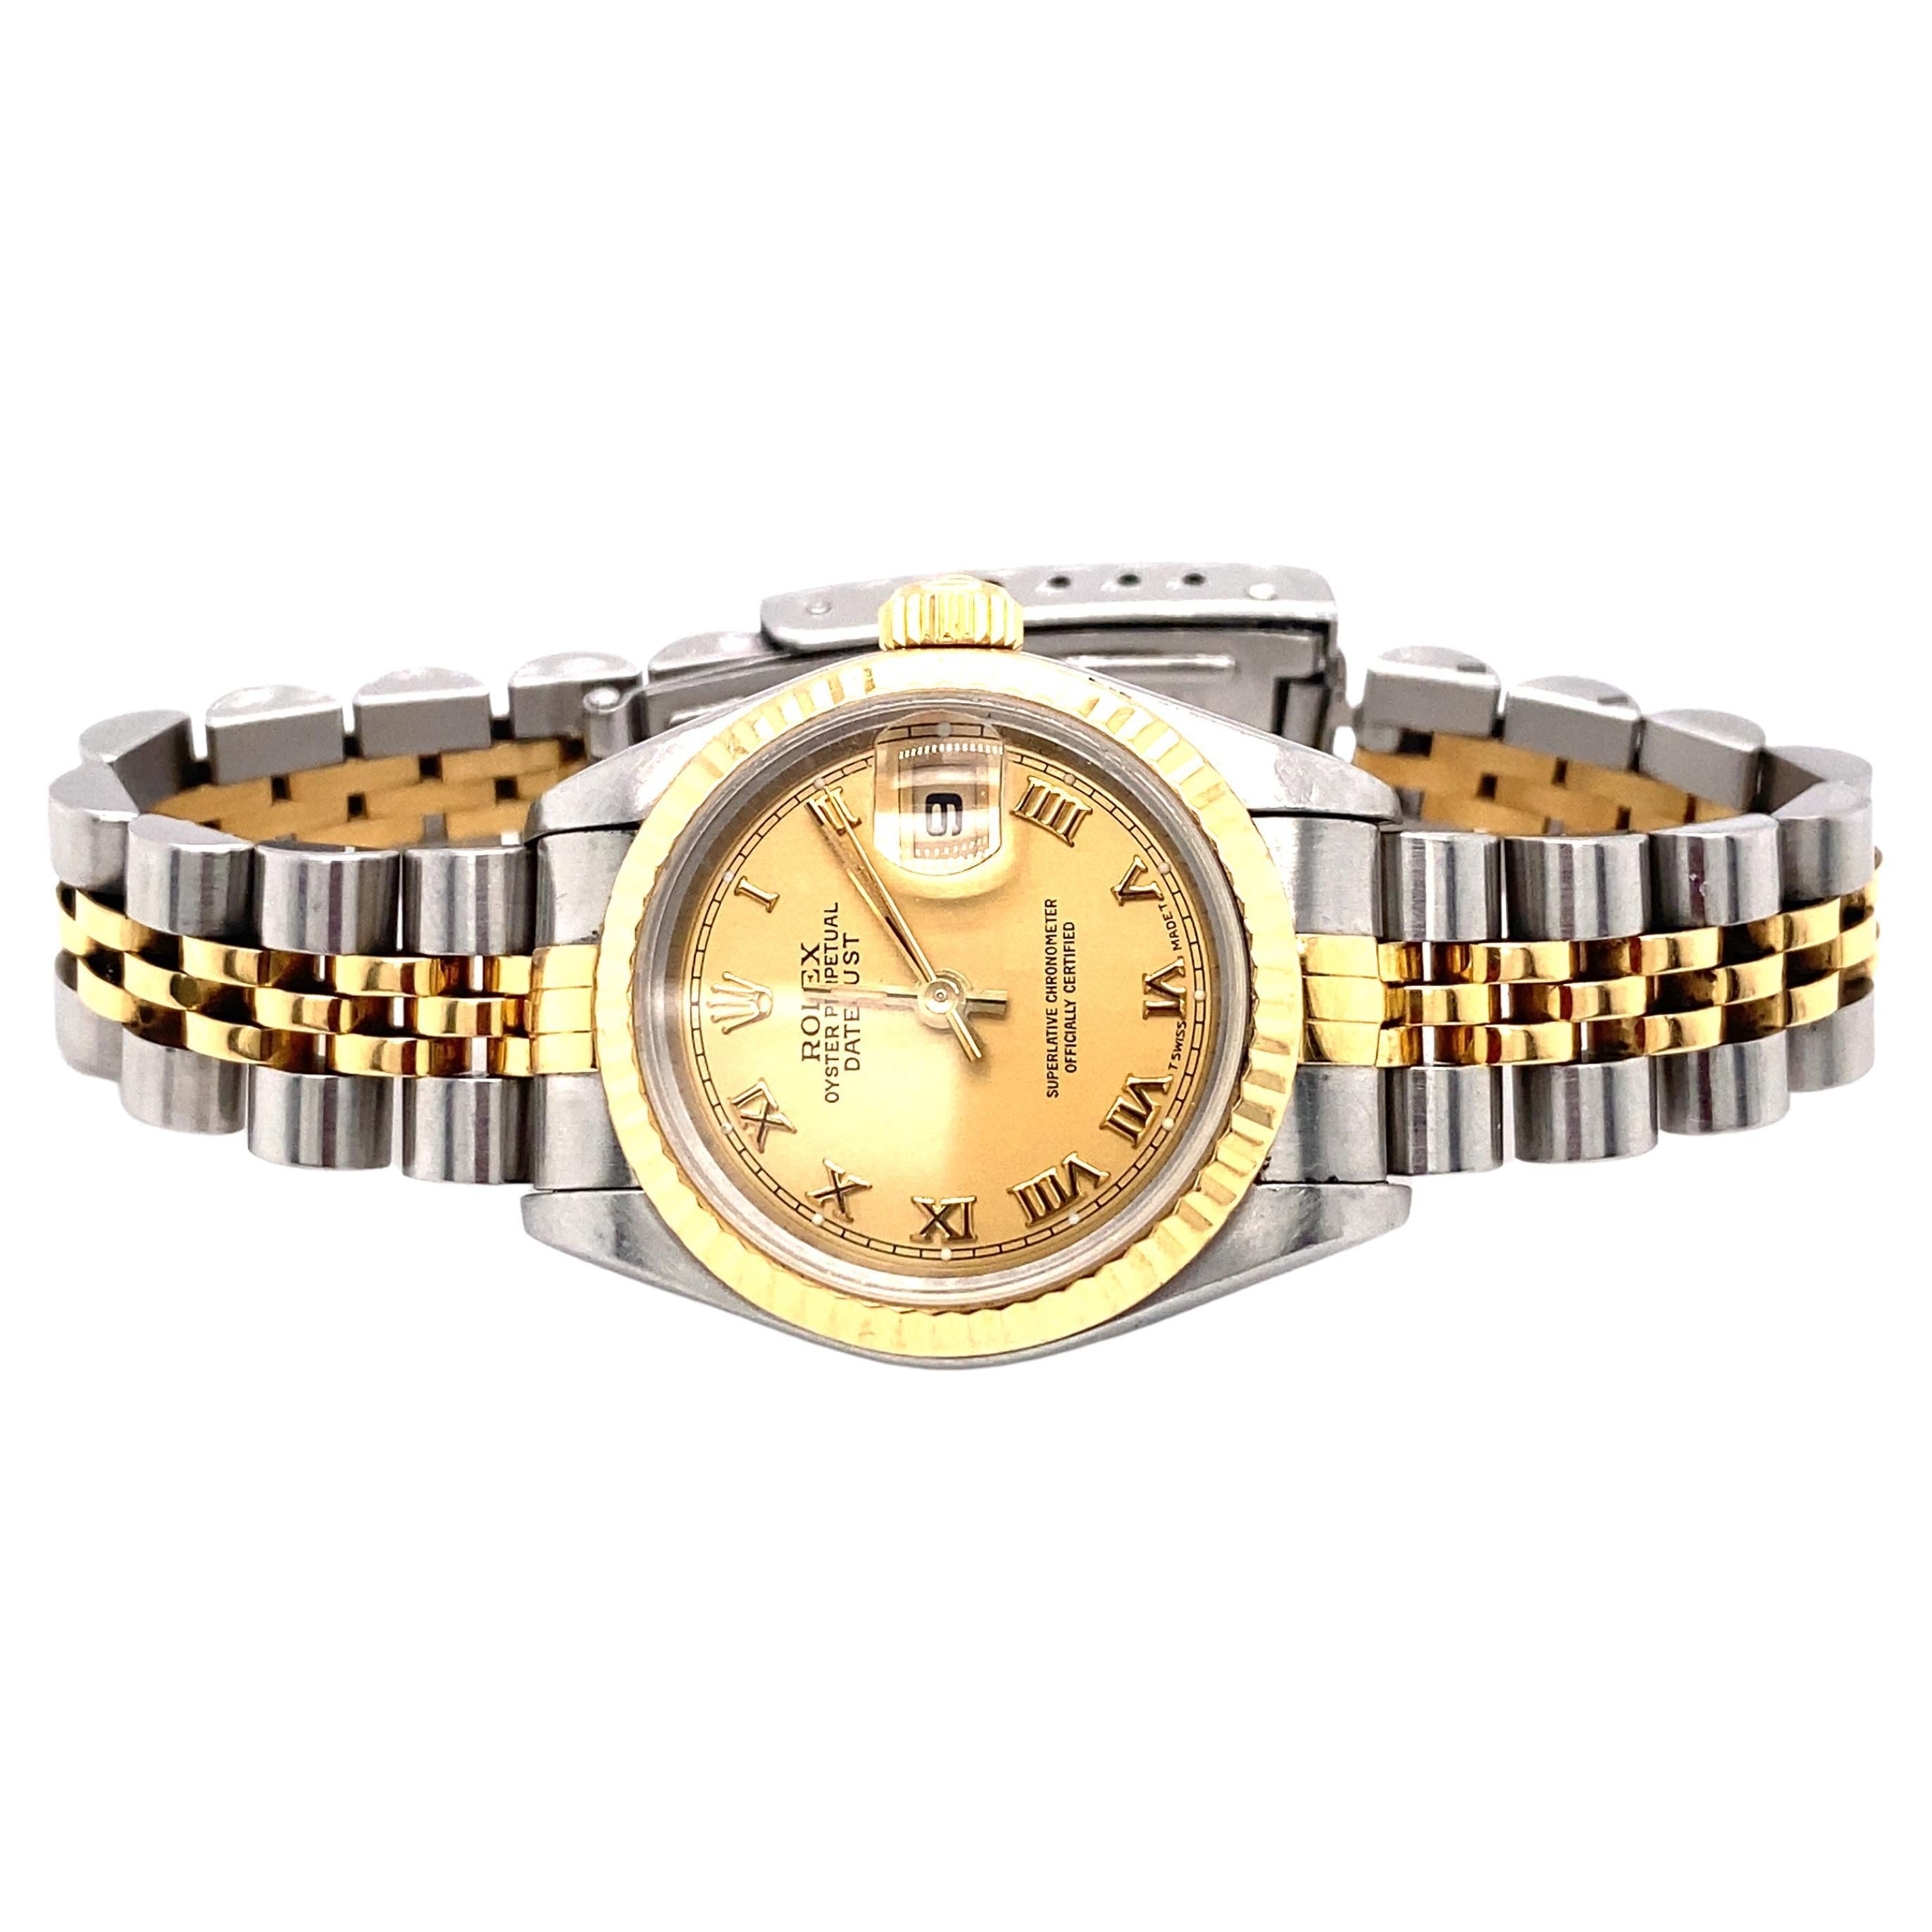 1995 Rolex Datejust Ladies Wrist Watch in Stainless Steel and 18 Karat Gold For Sale